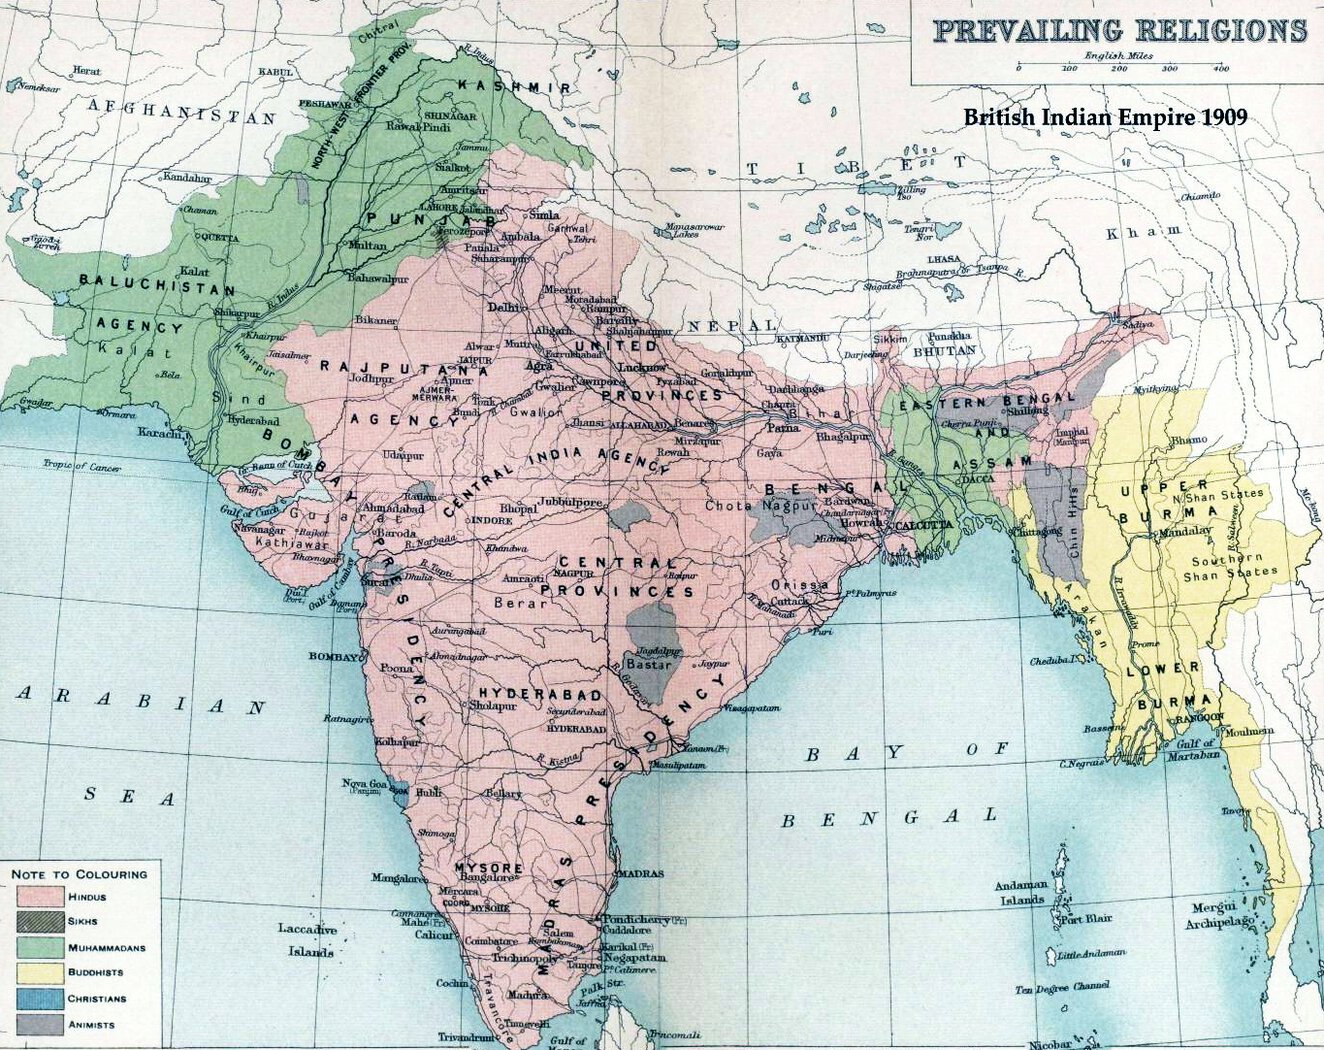 Map showing British empire in 1909 with color coding for regions with different religious groups.